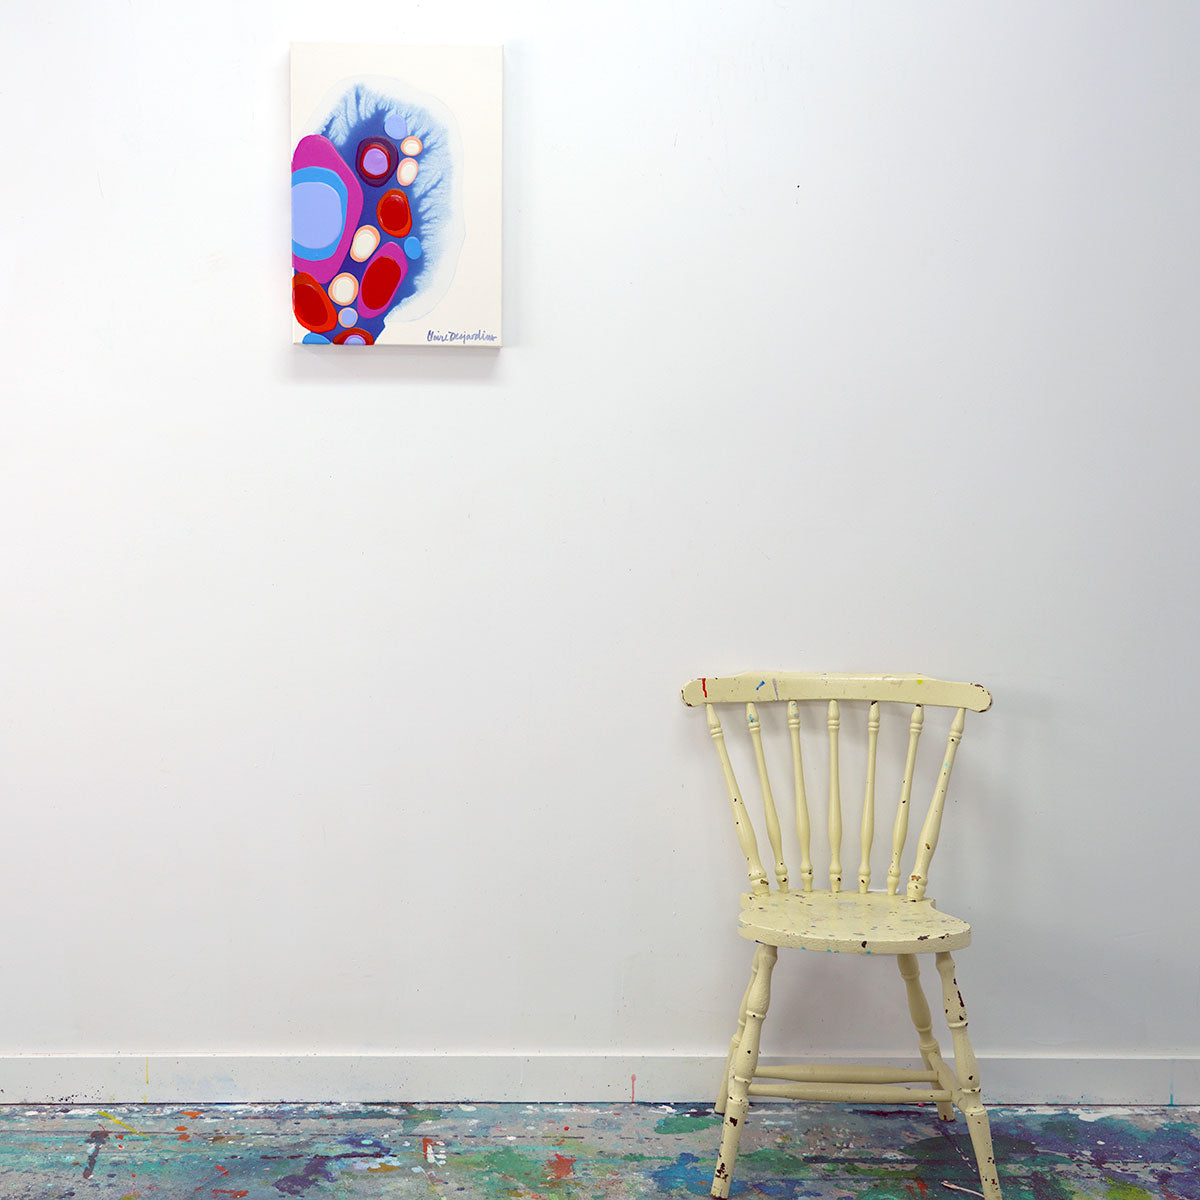 Original abstract painting, hung on wall, chair for scale